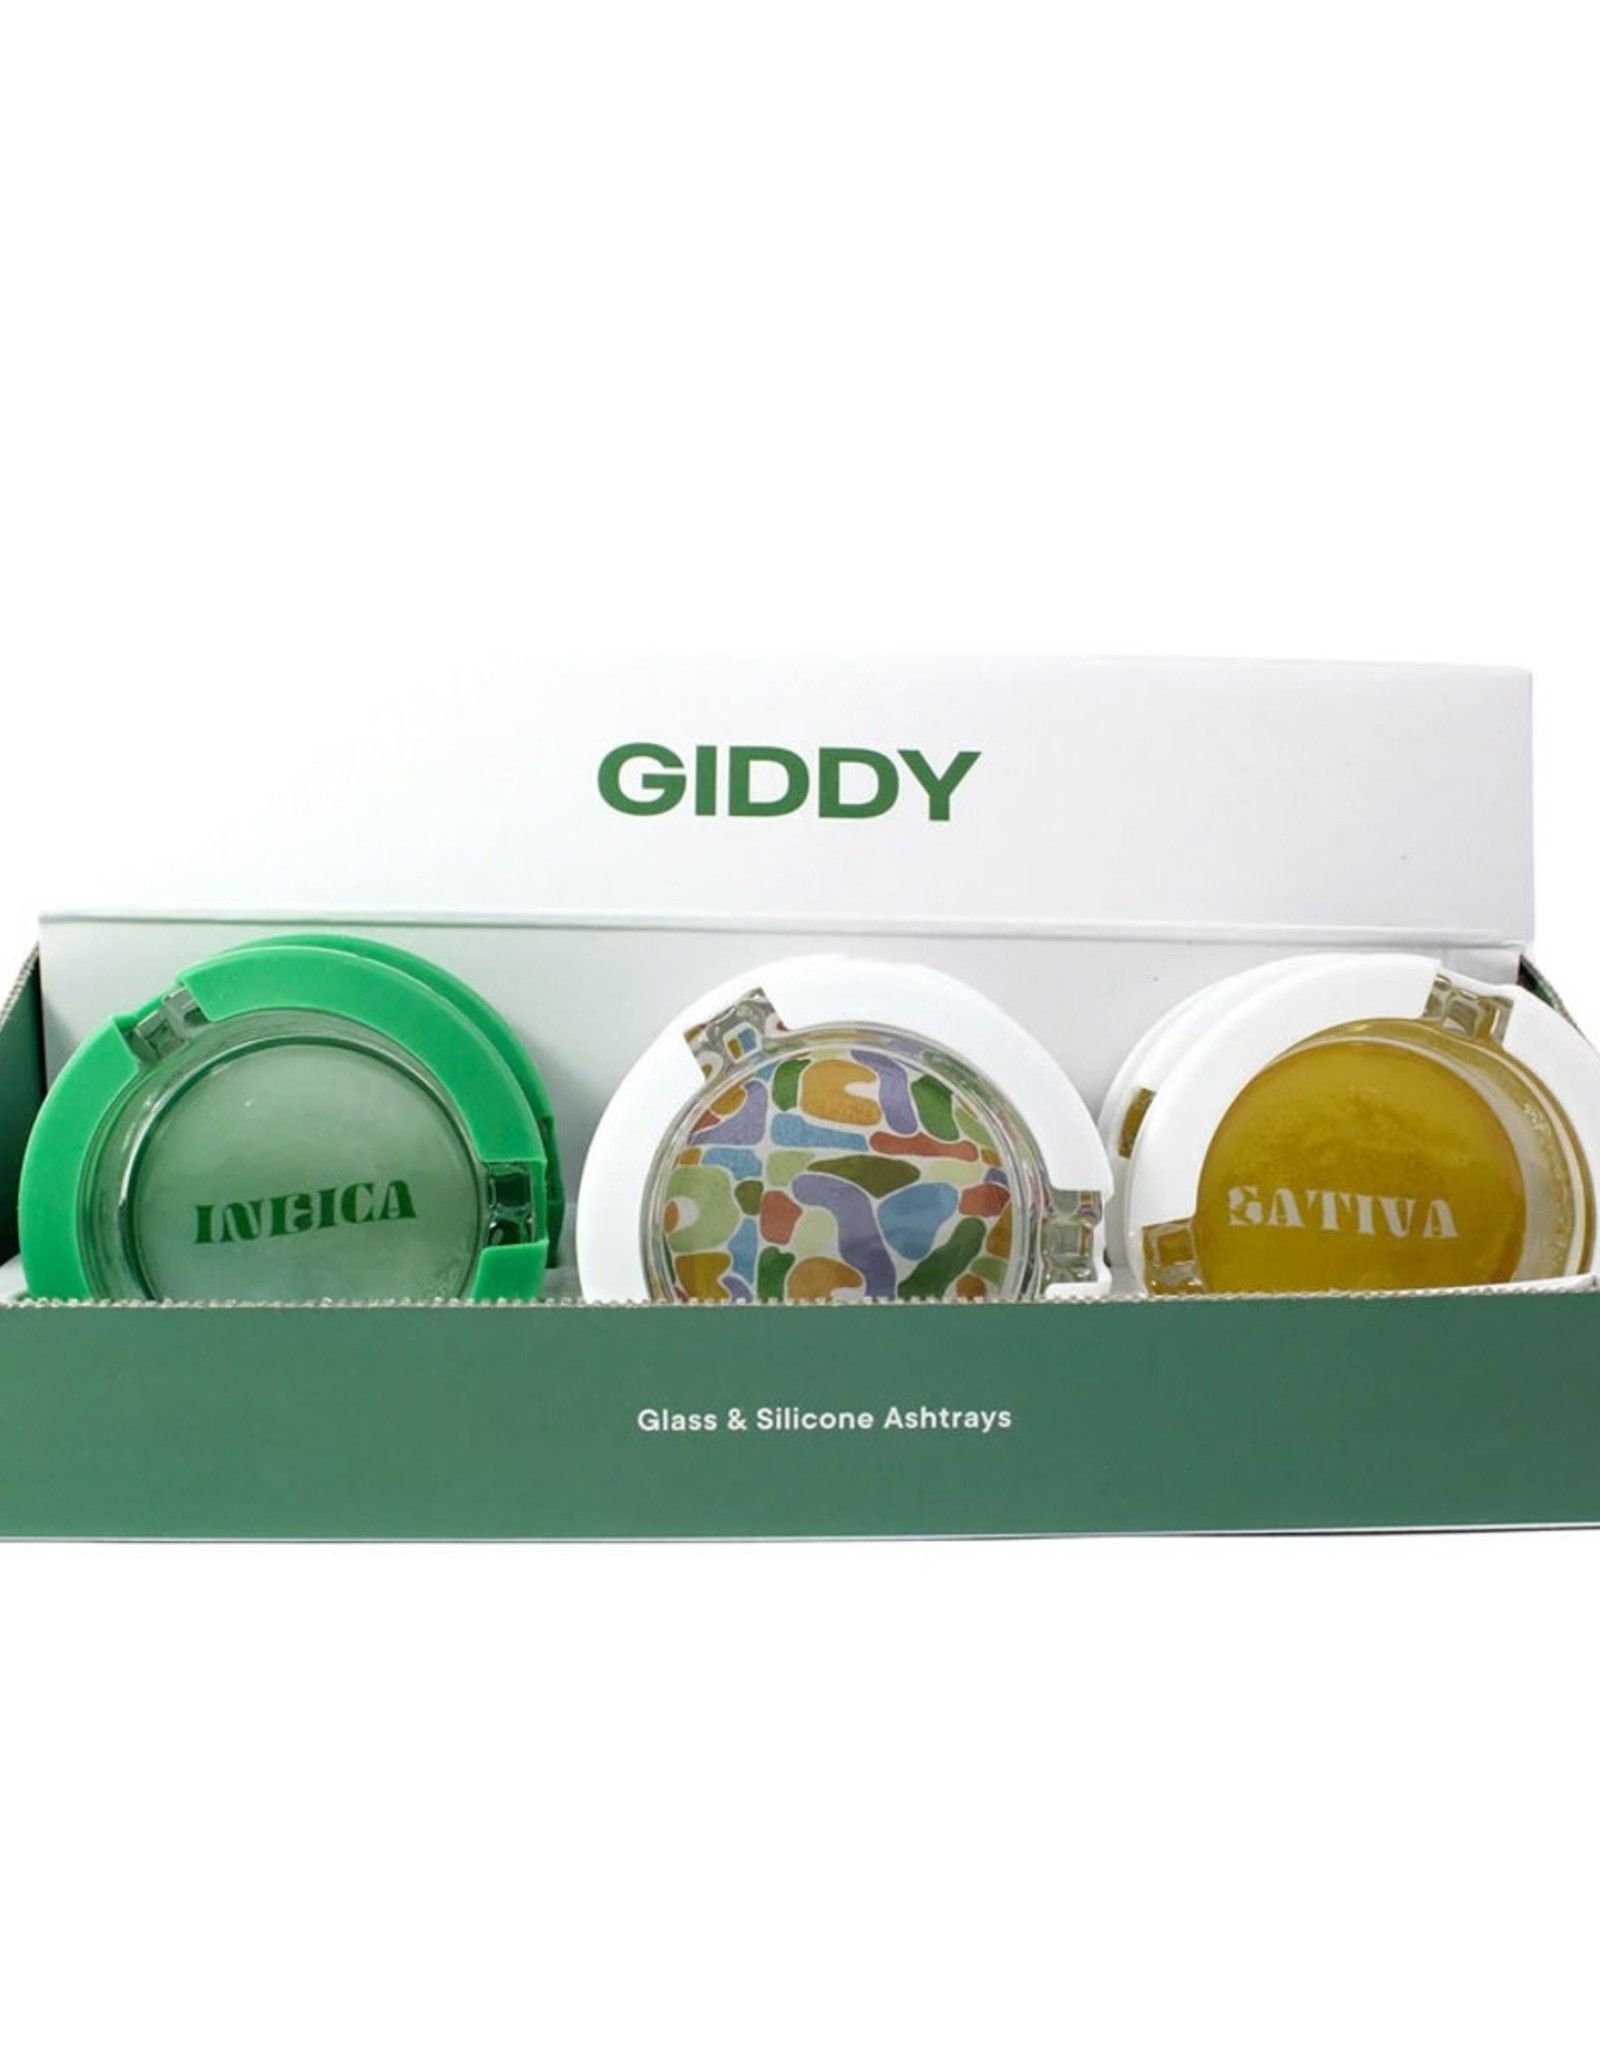 Giddy 3" Sativa Glass Ashtray with Silicone Cover